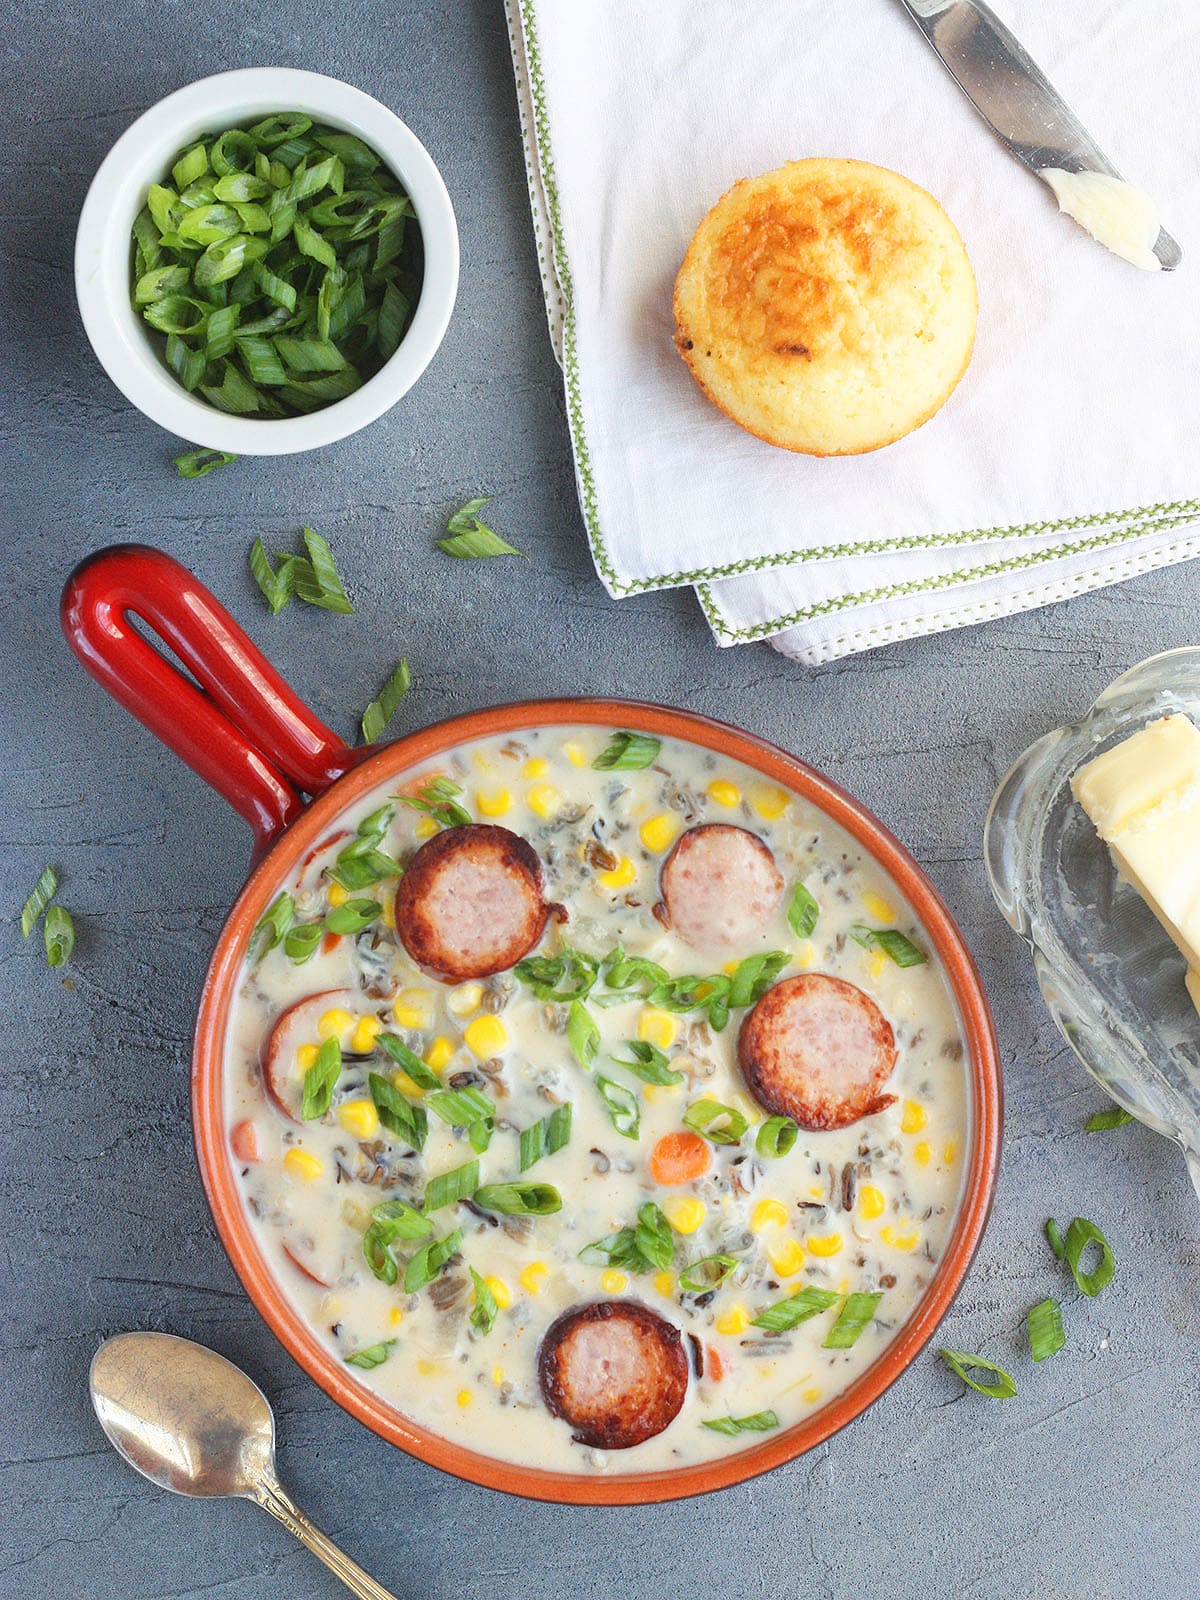 Serving of smoked sausage corn chowder garnished with green onions. A bowl of sliced green onions and a corn muffin are seen to the side.